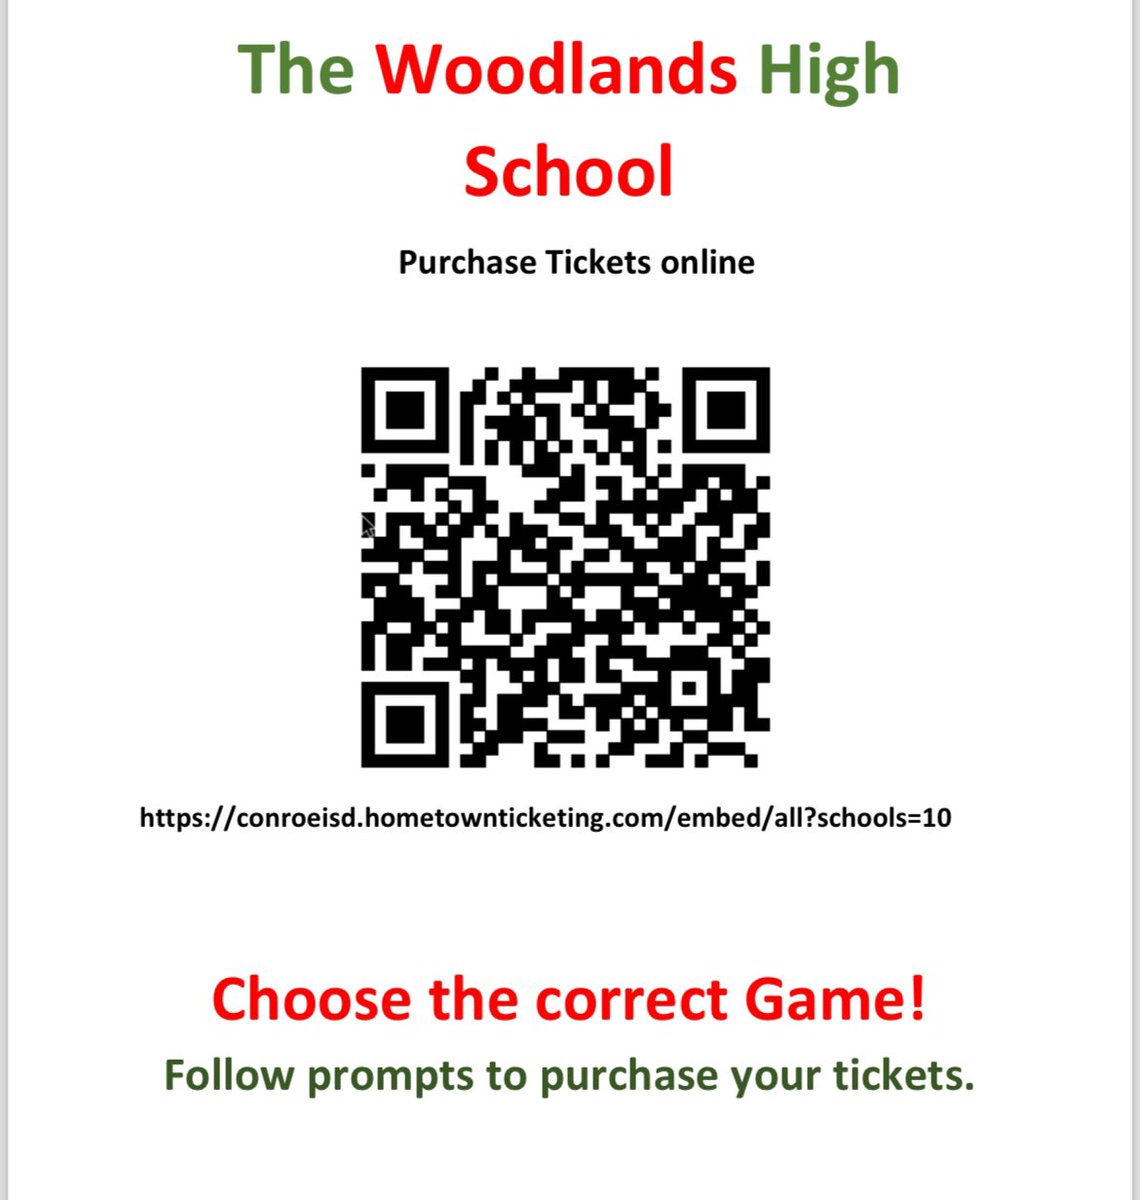 Ticket QR for Thursday night. Cash at the door is also an option.